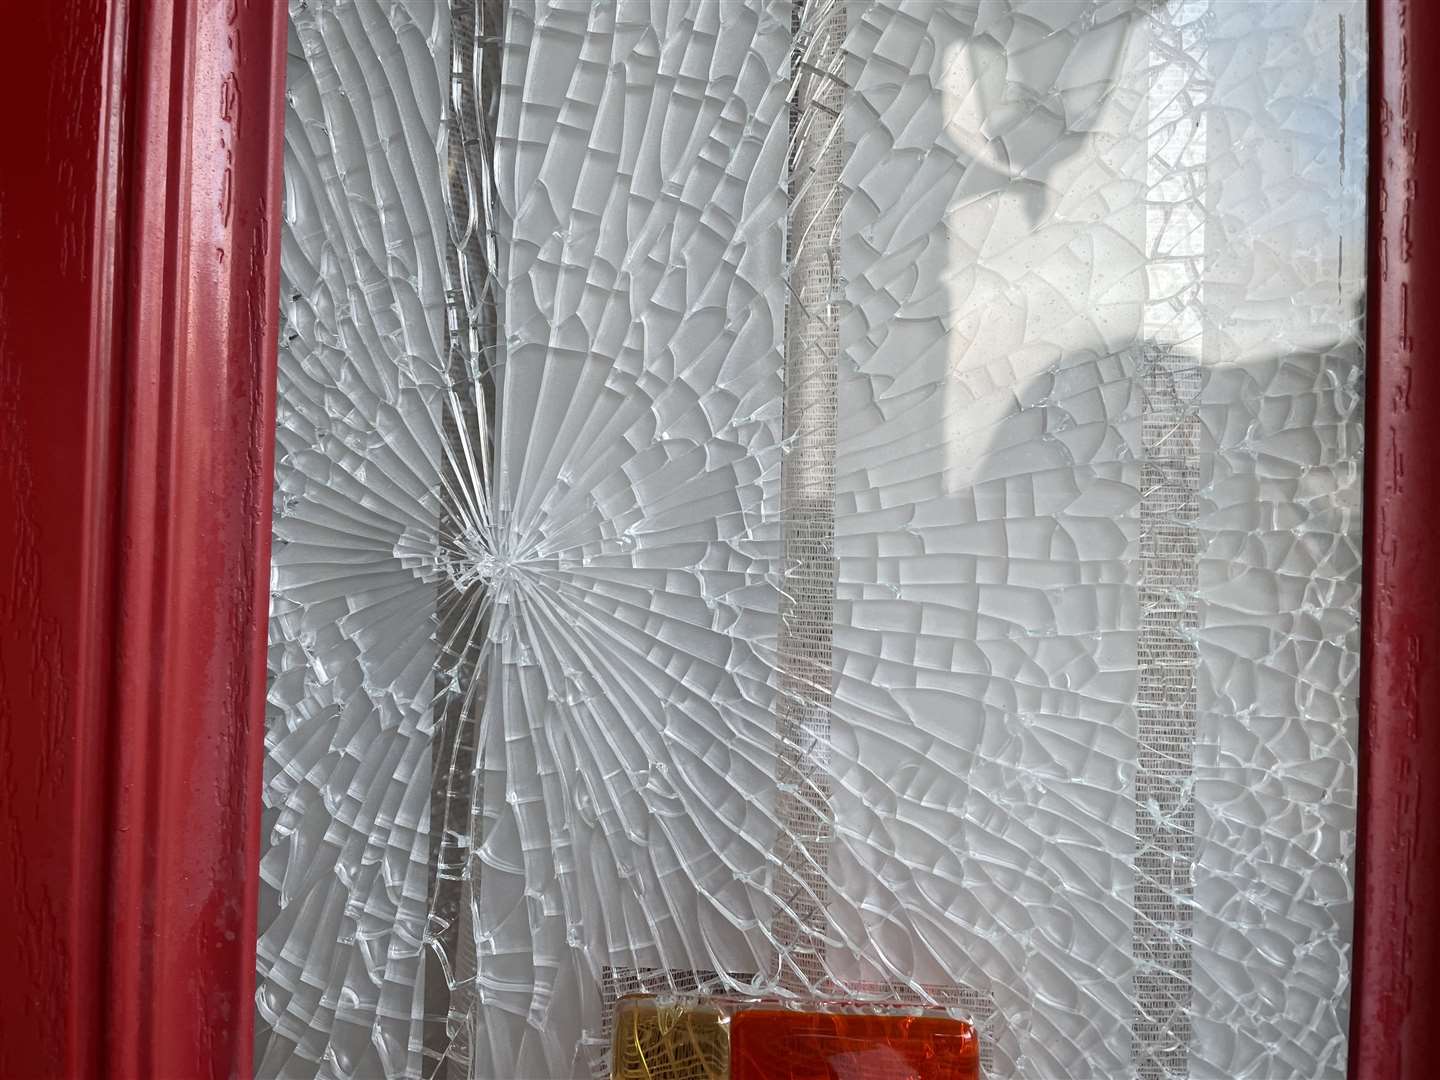 Another house has also had its door window smashed